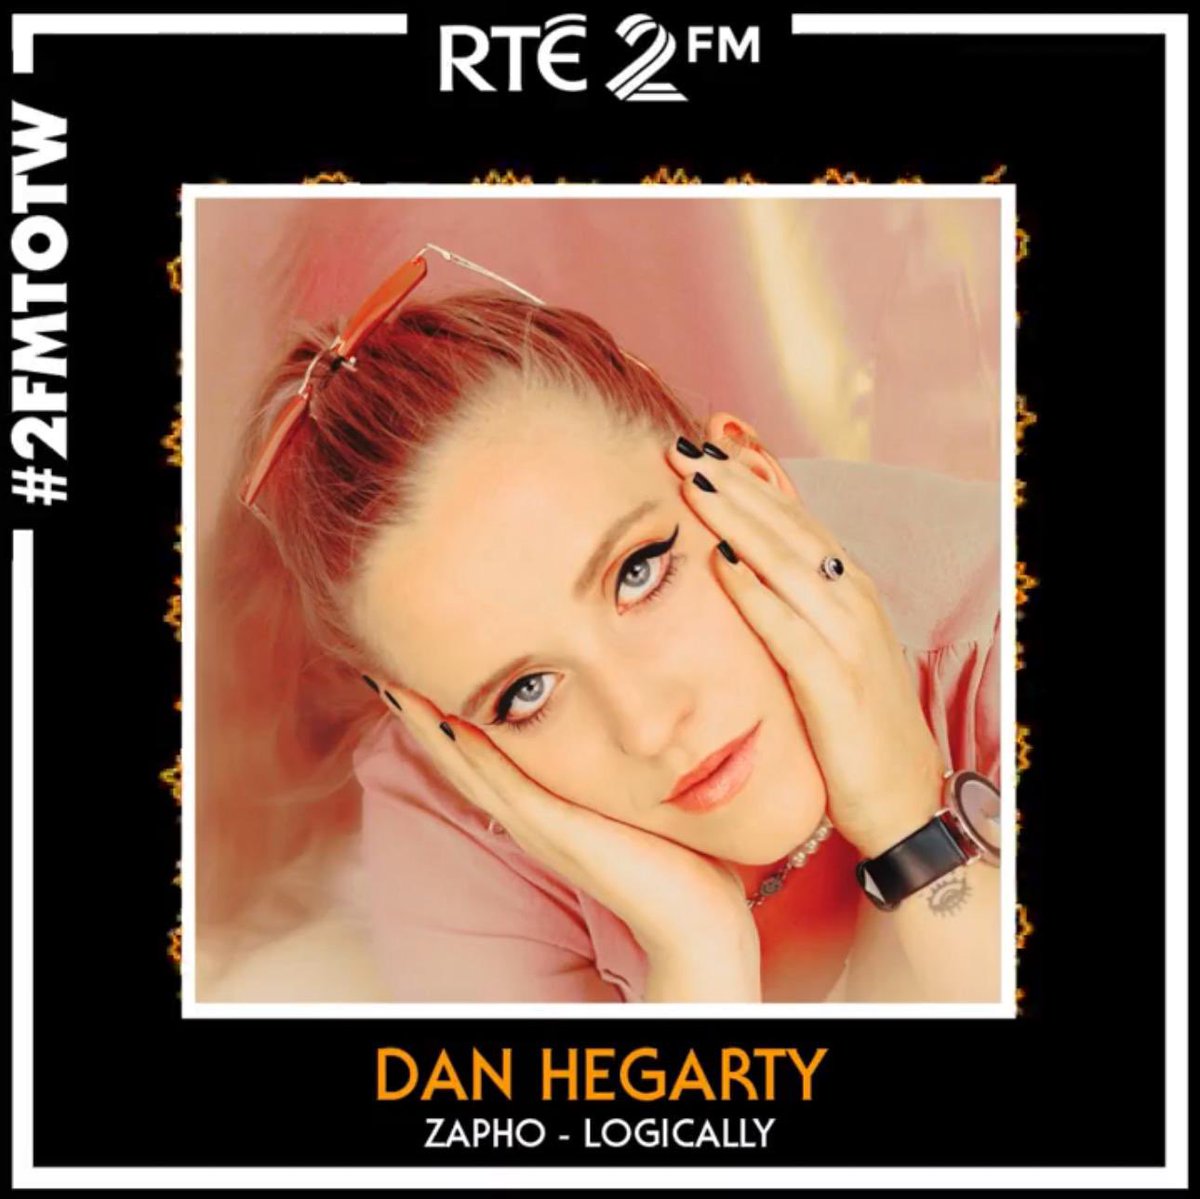 From 11pm on @RTE2fm - there’s a good chance of hearing @annied0gmusic, @Englishteac_her, @YYYs, @HFV_LK, @moonduo, @TheAlteredHours, @C2Cdjs, @glass_beams, the @BeyondThePaleIE bound @courtneymelba, plus my 2FMTOTW from @ZAPHOMUSIC